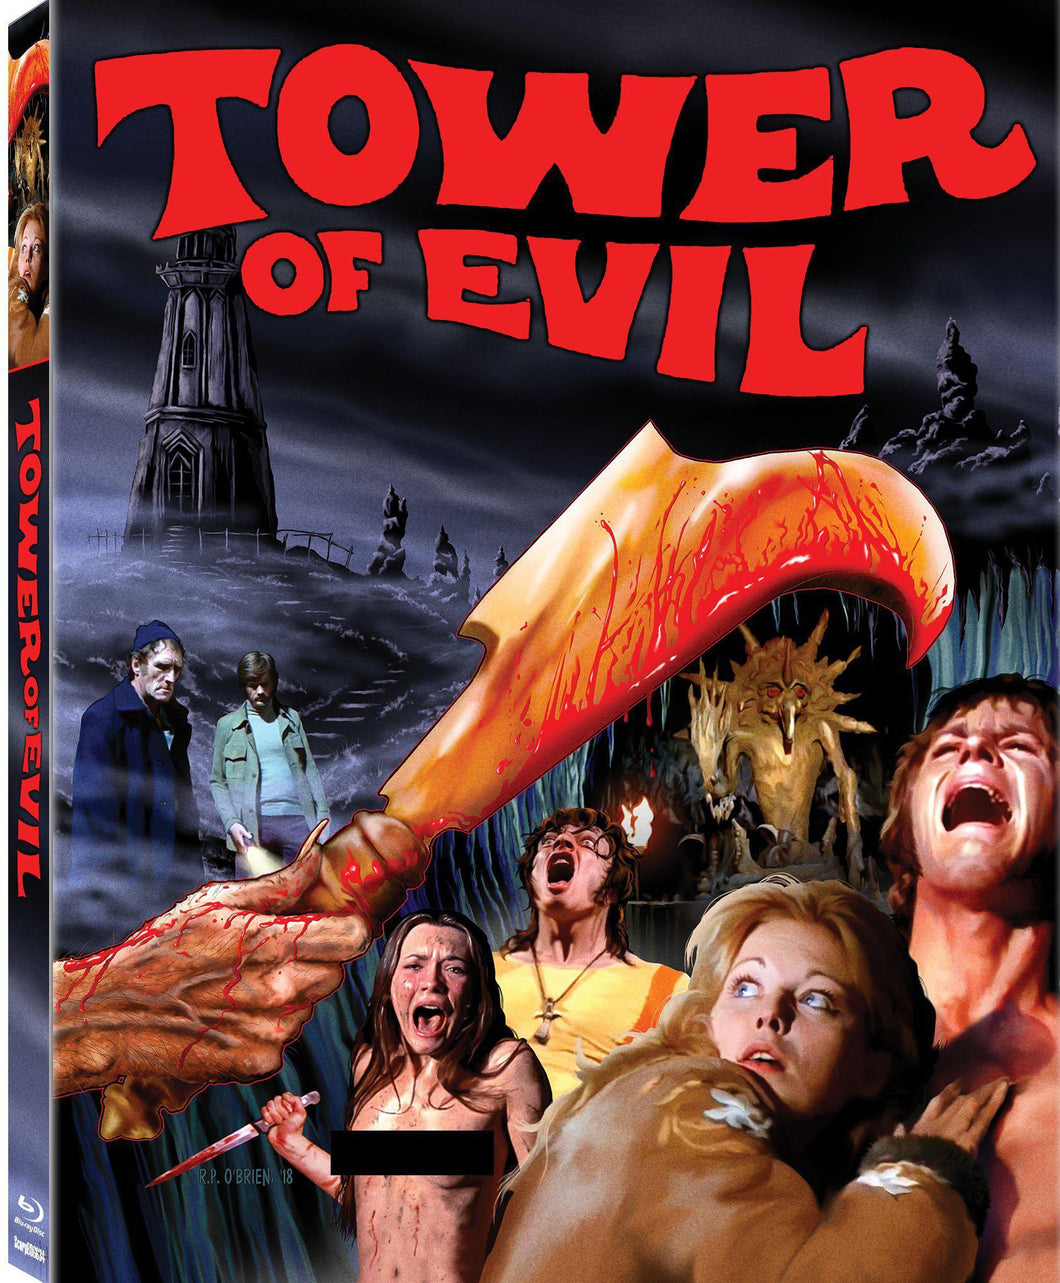 Tower of Evil (Blu-ray): Ronin Flix - Slipcover